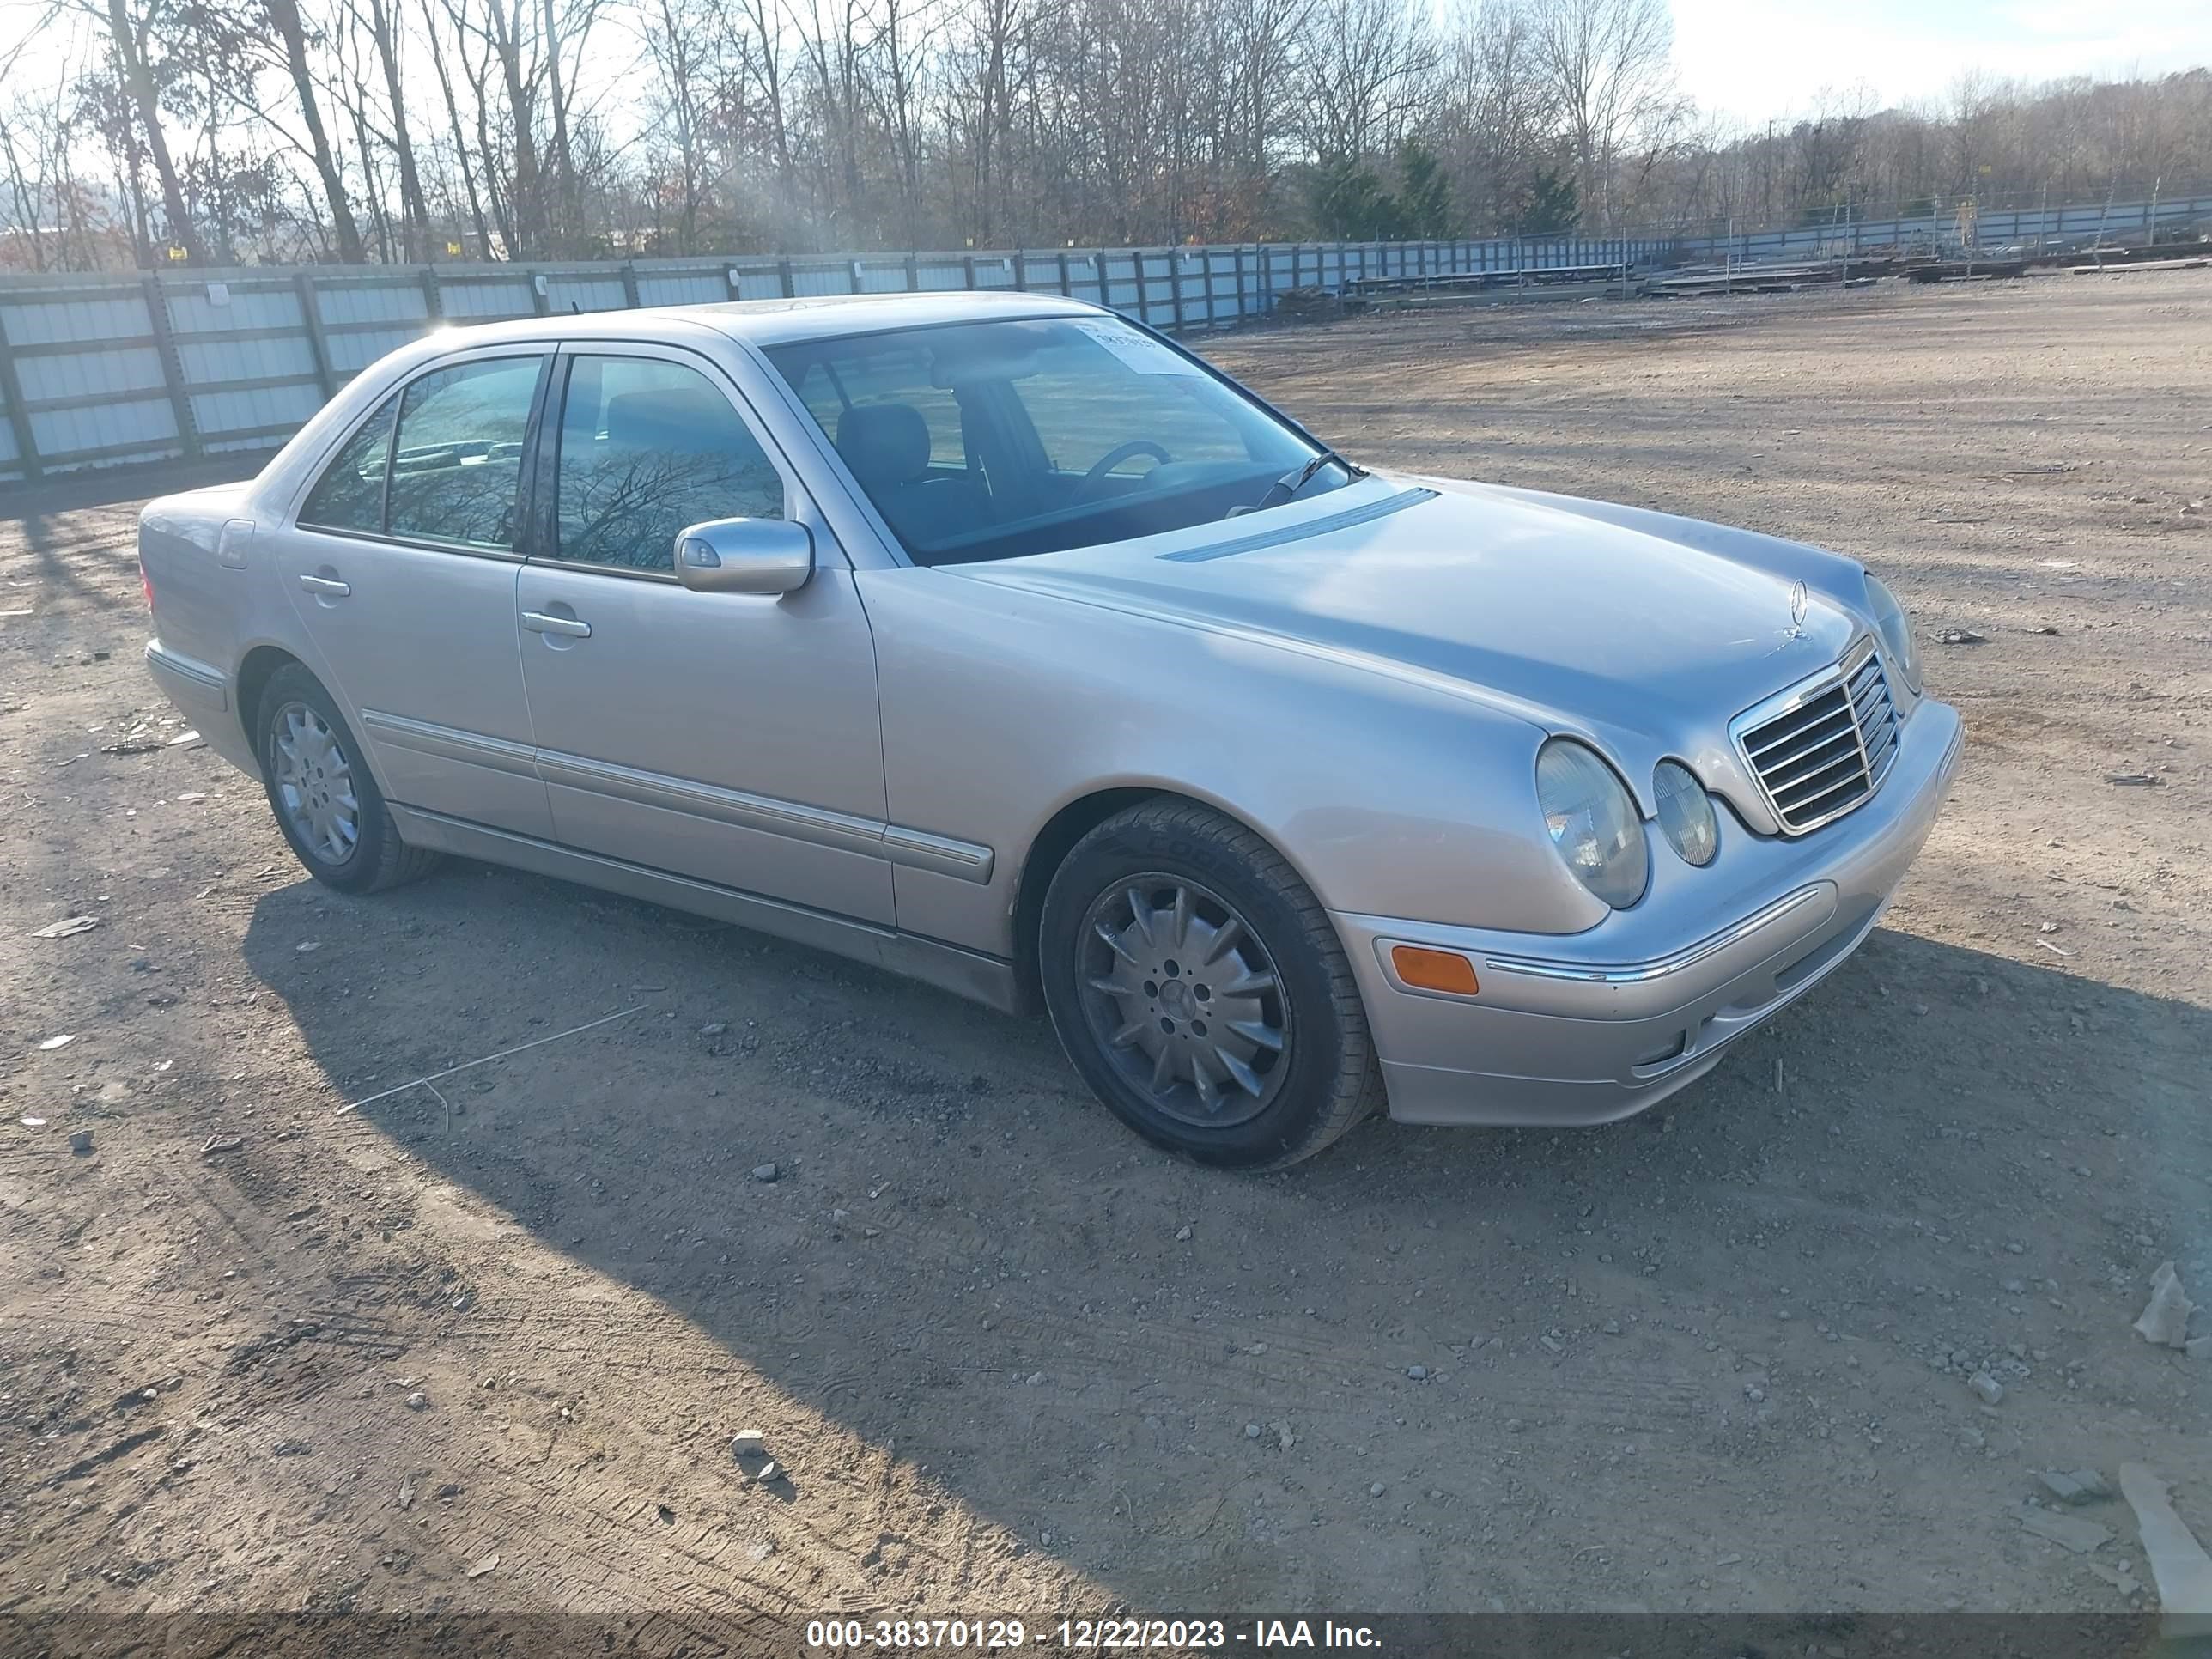 vin: WDBJF65J22B474917 WDBJF65J22B474917 2002 mercedes-benz e-klasse 3200 for Sale in 37914, 3634 E. Governor John Sevier Hwy, Knoxville, Tennessee, USA